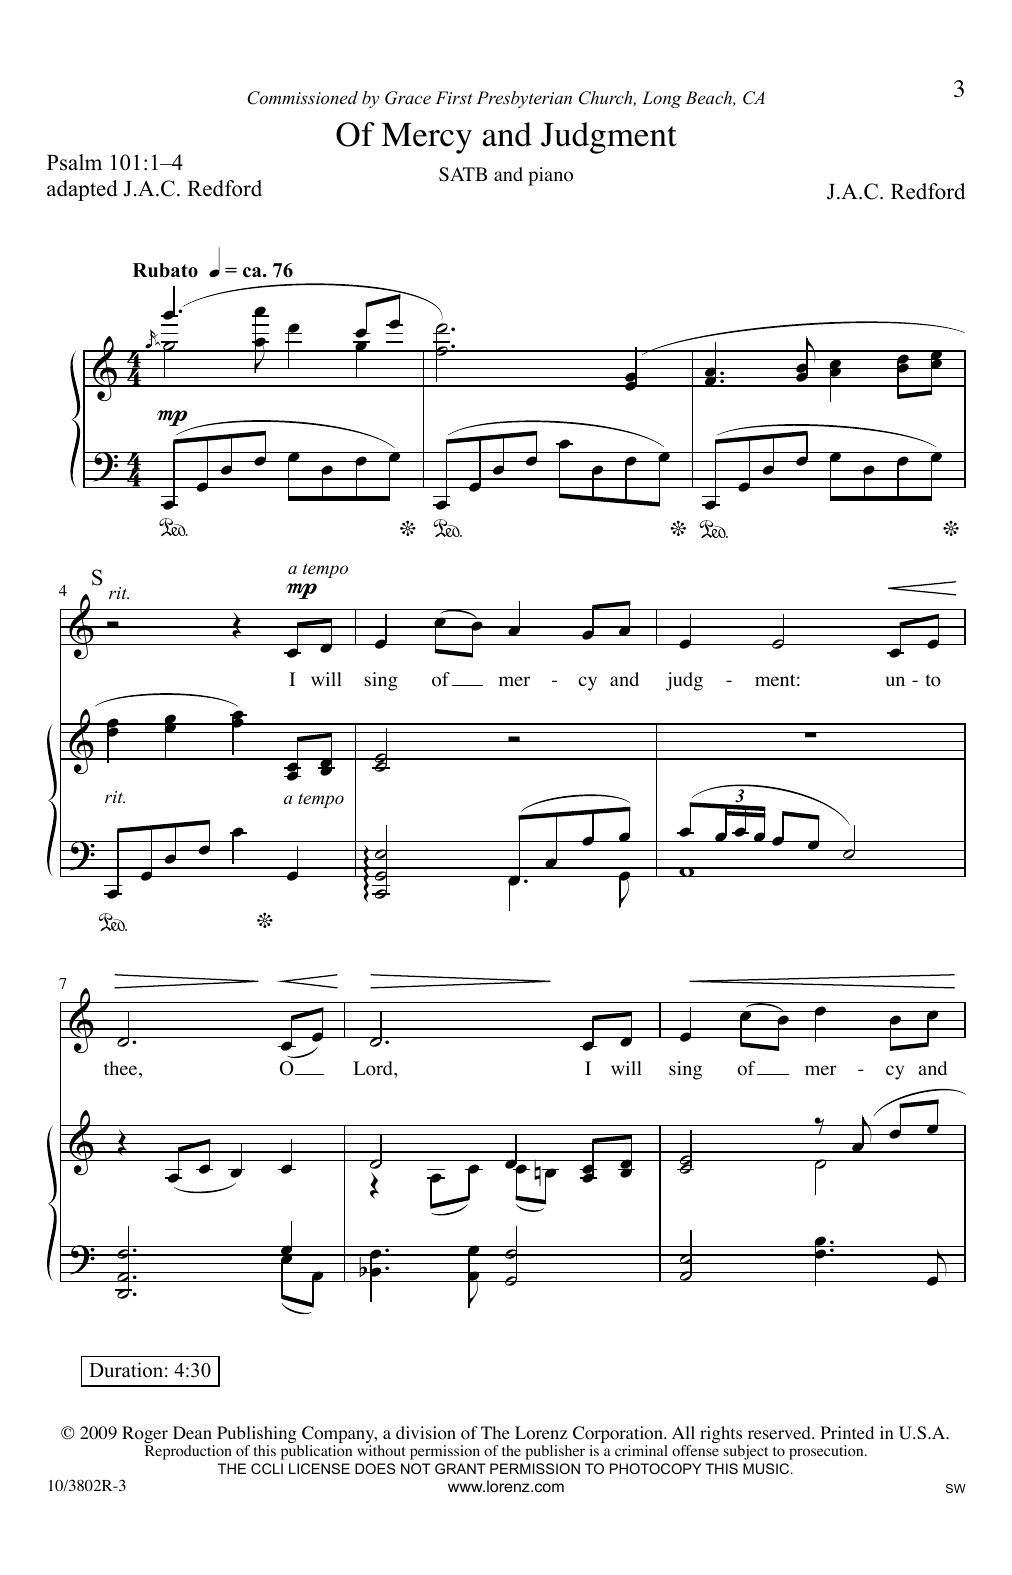 Download J.A.C. Redford Of Mercy And Judgment Sheet Music